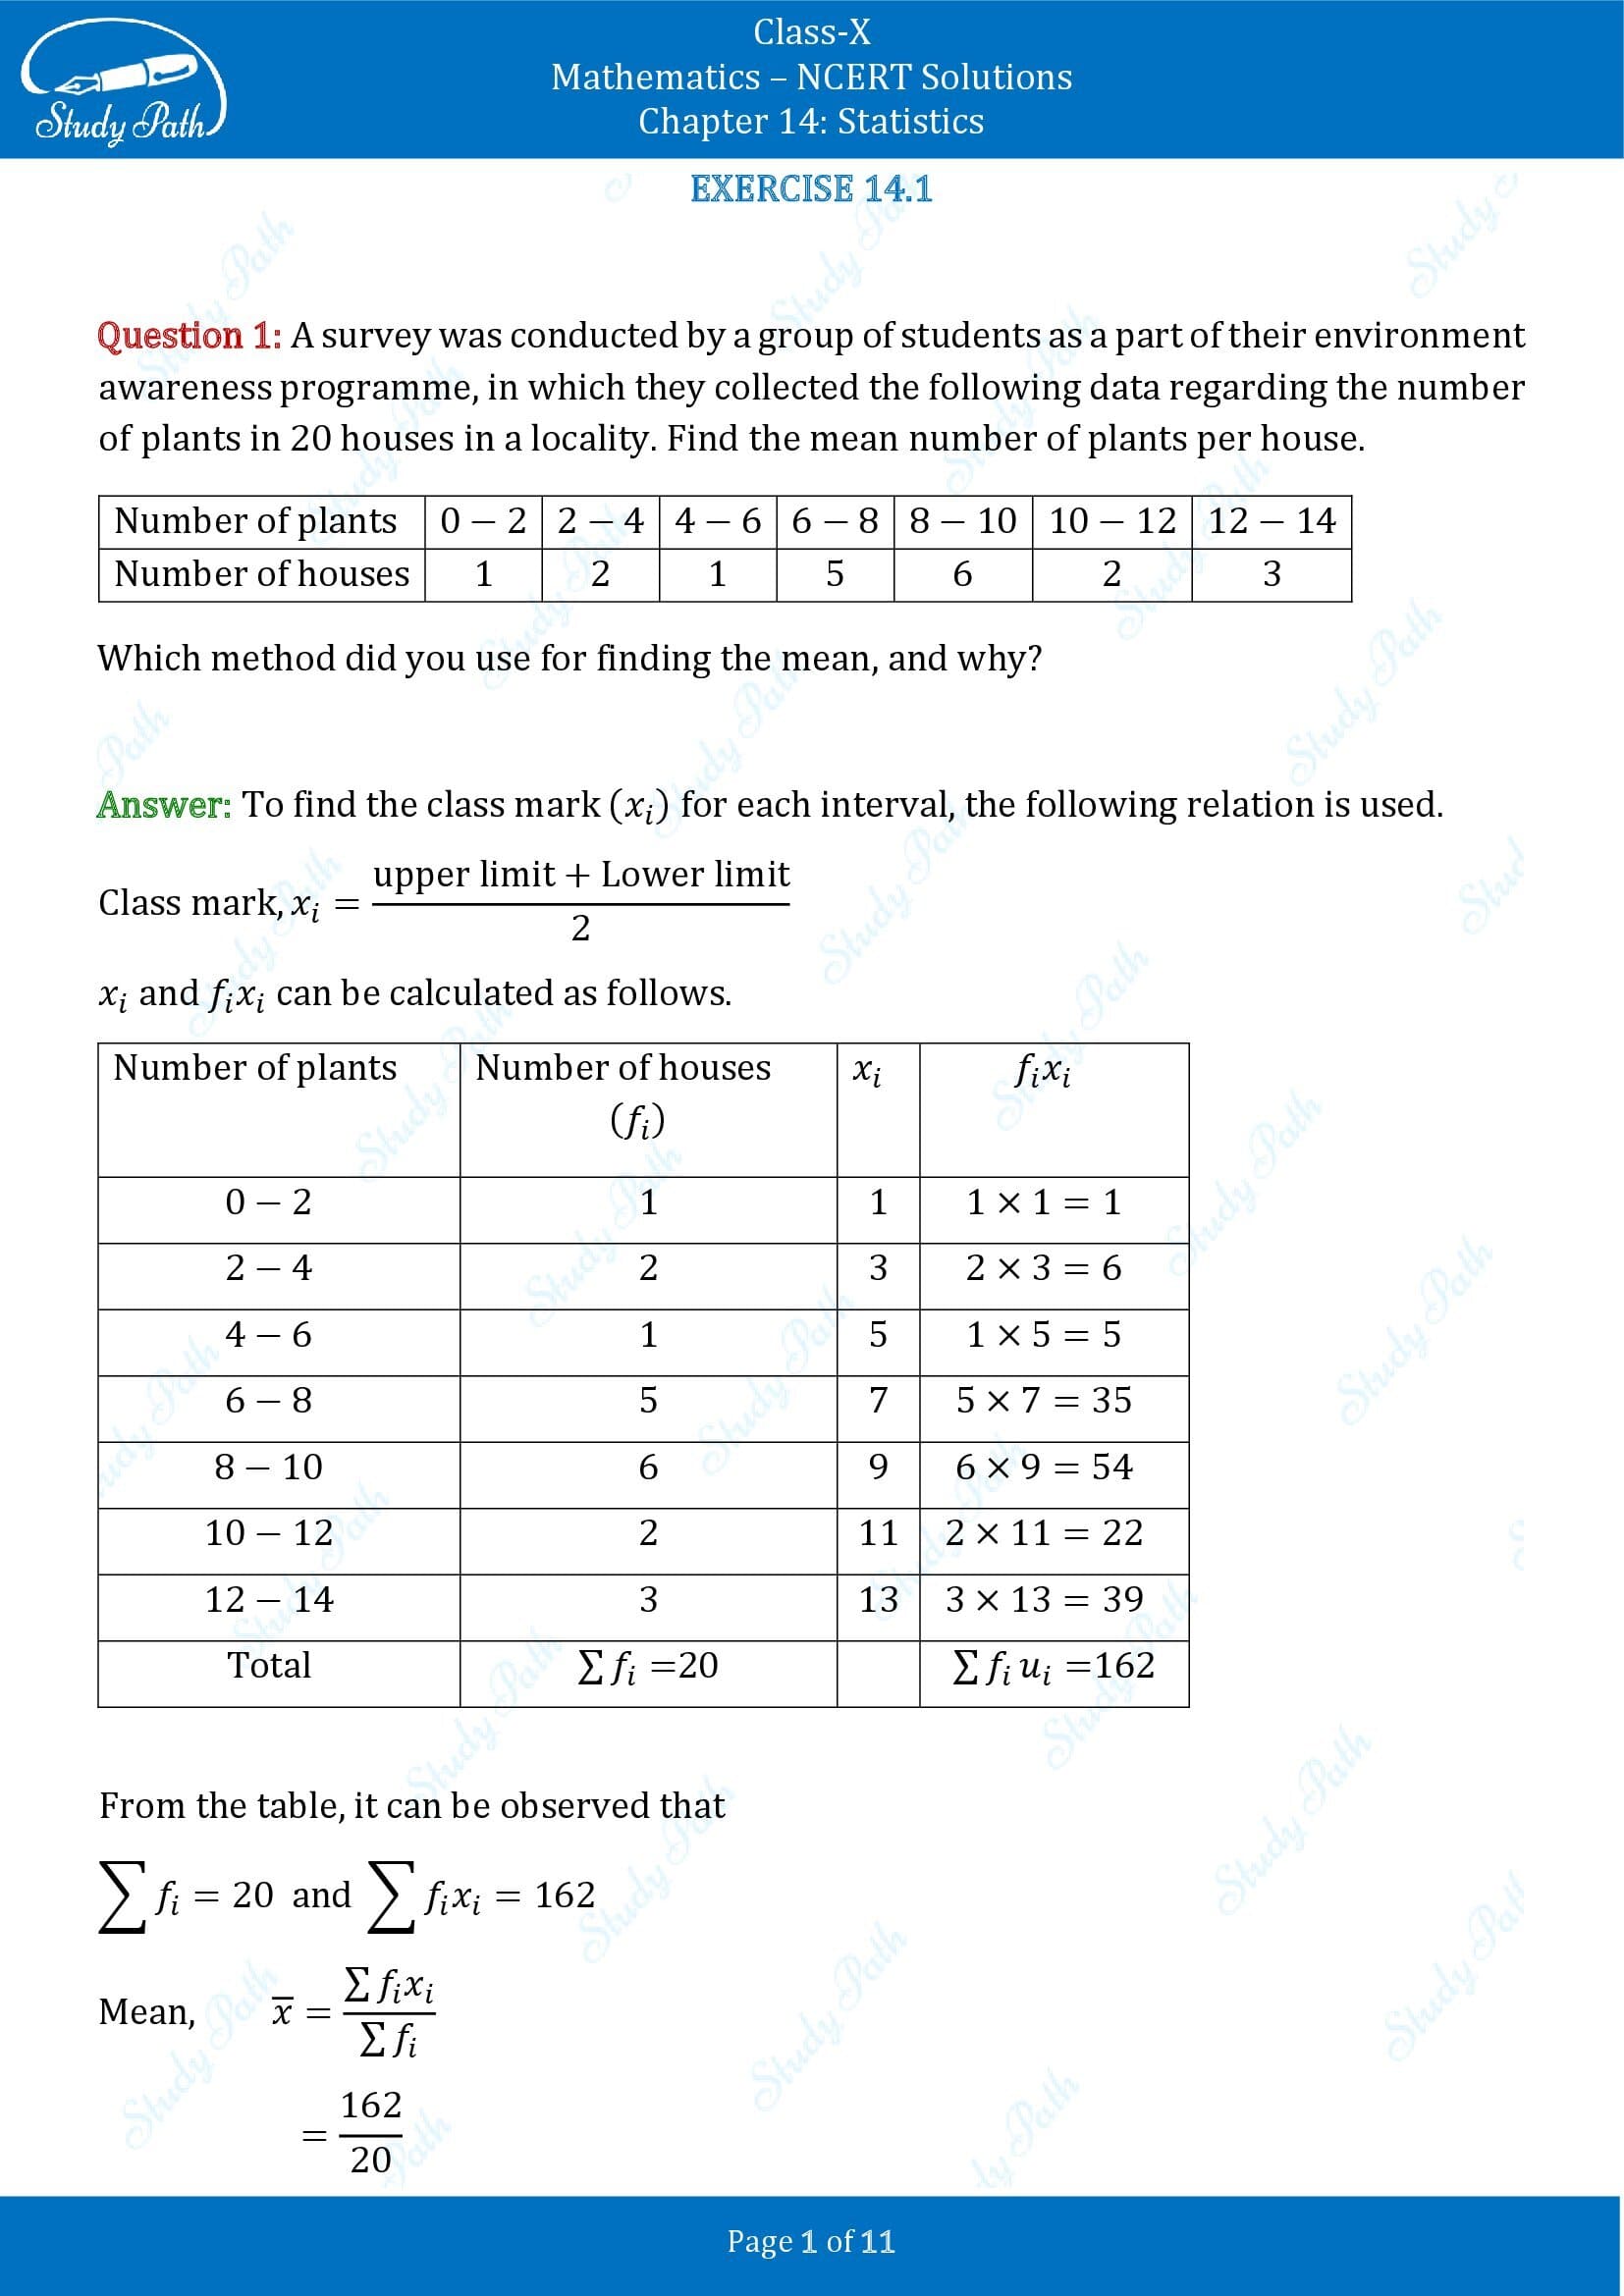 NCERT Solutions for Class 10 Maths Chapter 14 Statistics Exercise 14.1 00001